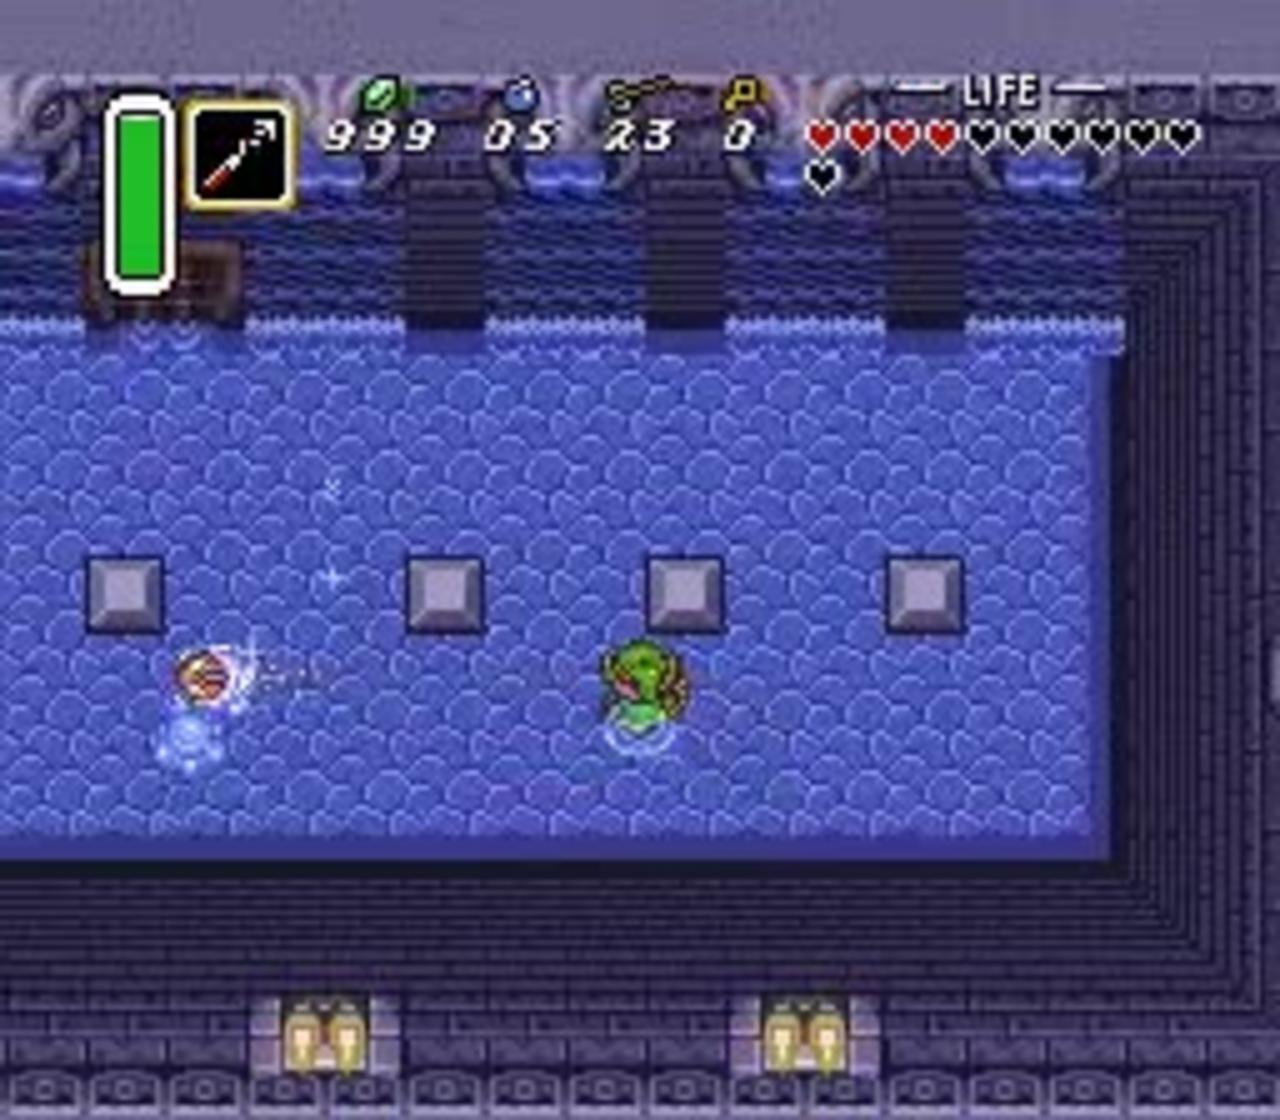 LET'S PLAY THE LEGEND OF ZELDA - A - LINK TO THE PAST [ PART 28]